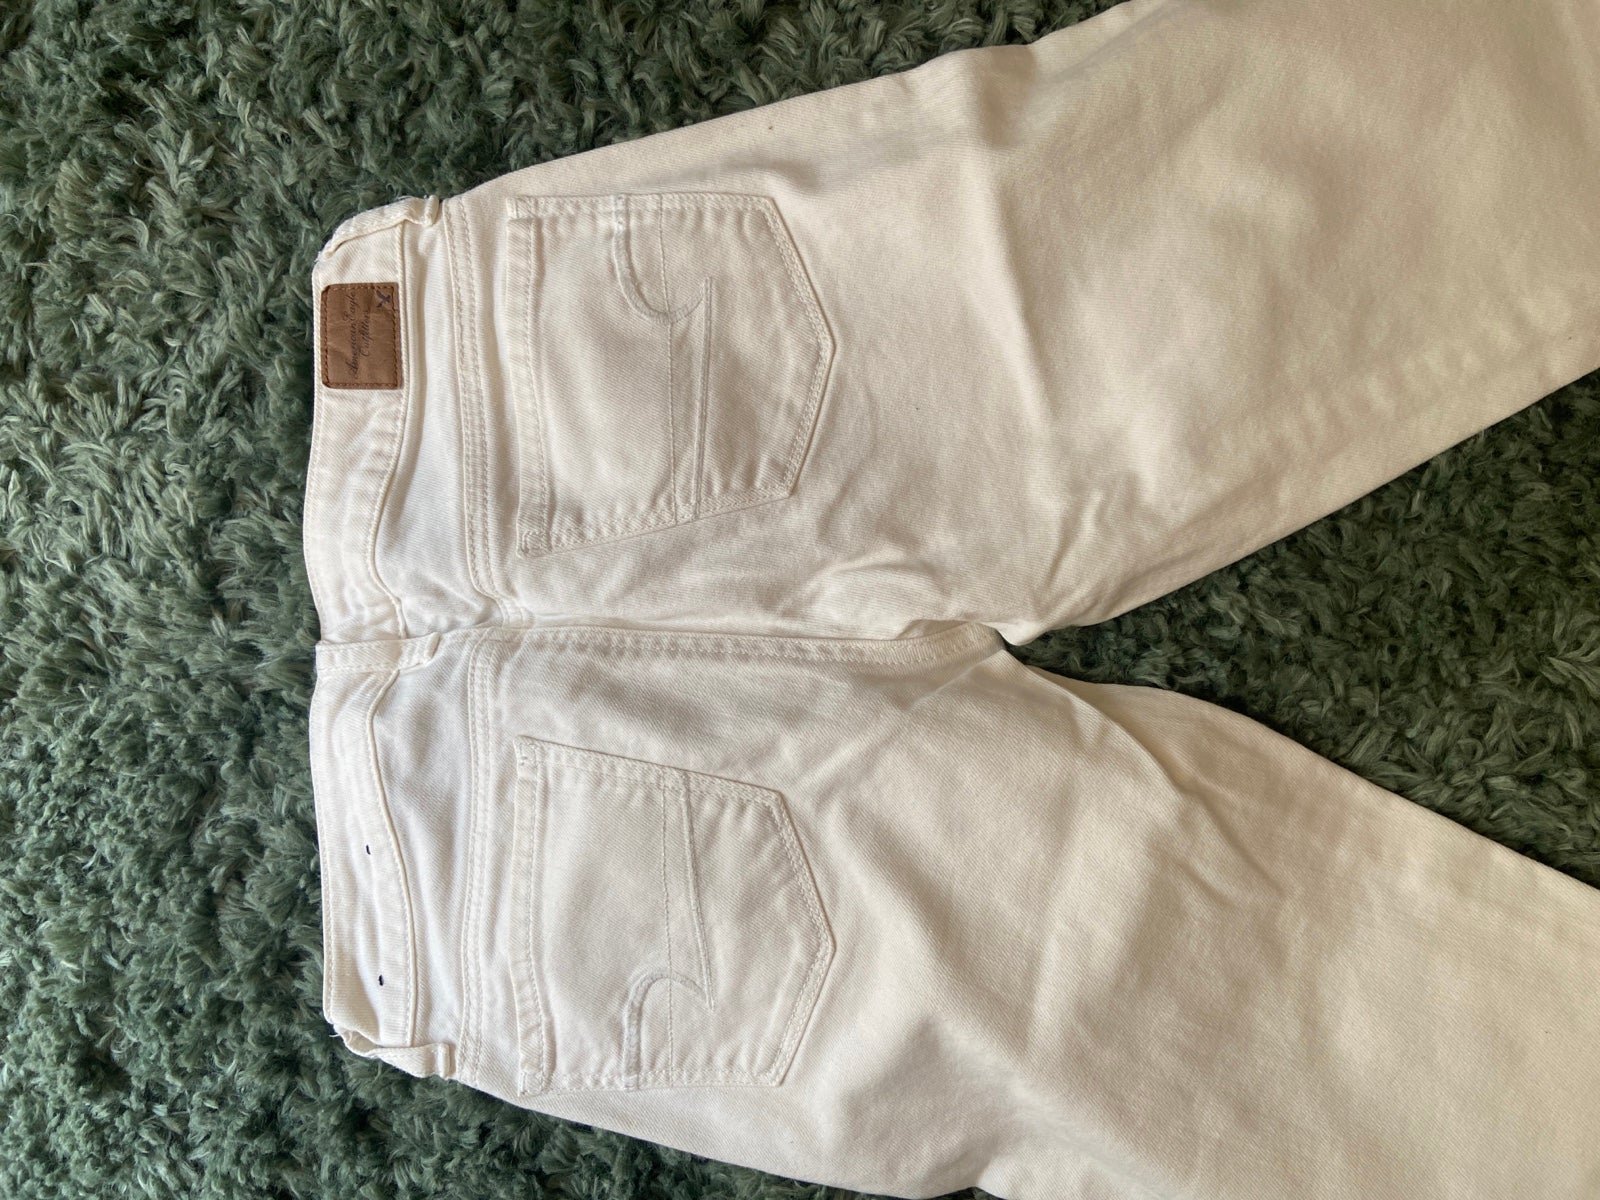 Personality Size 4- White American Eagle bootcut jeans with beige detail. mOfgfLu1u hot sale